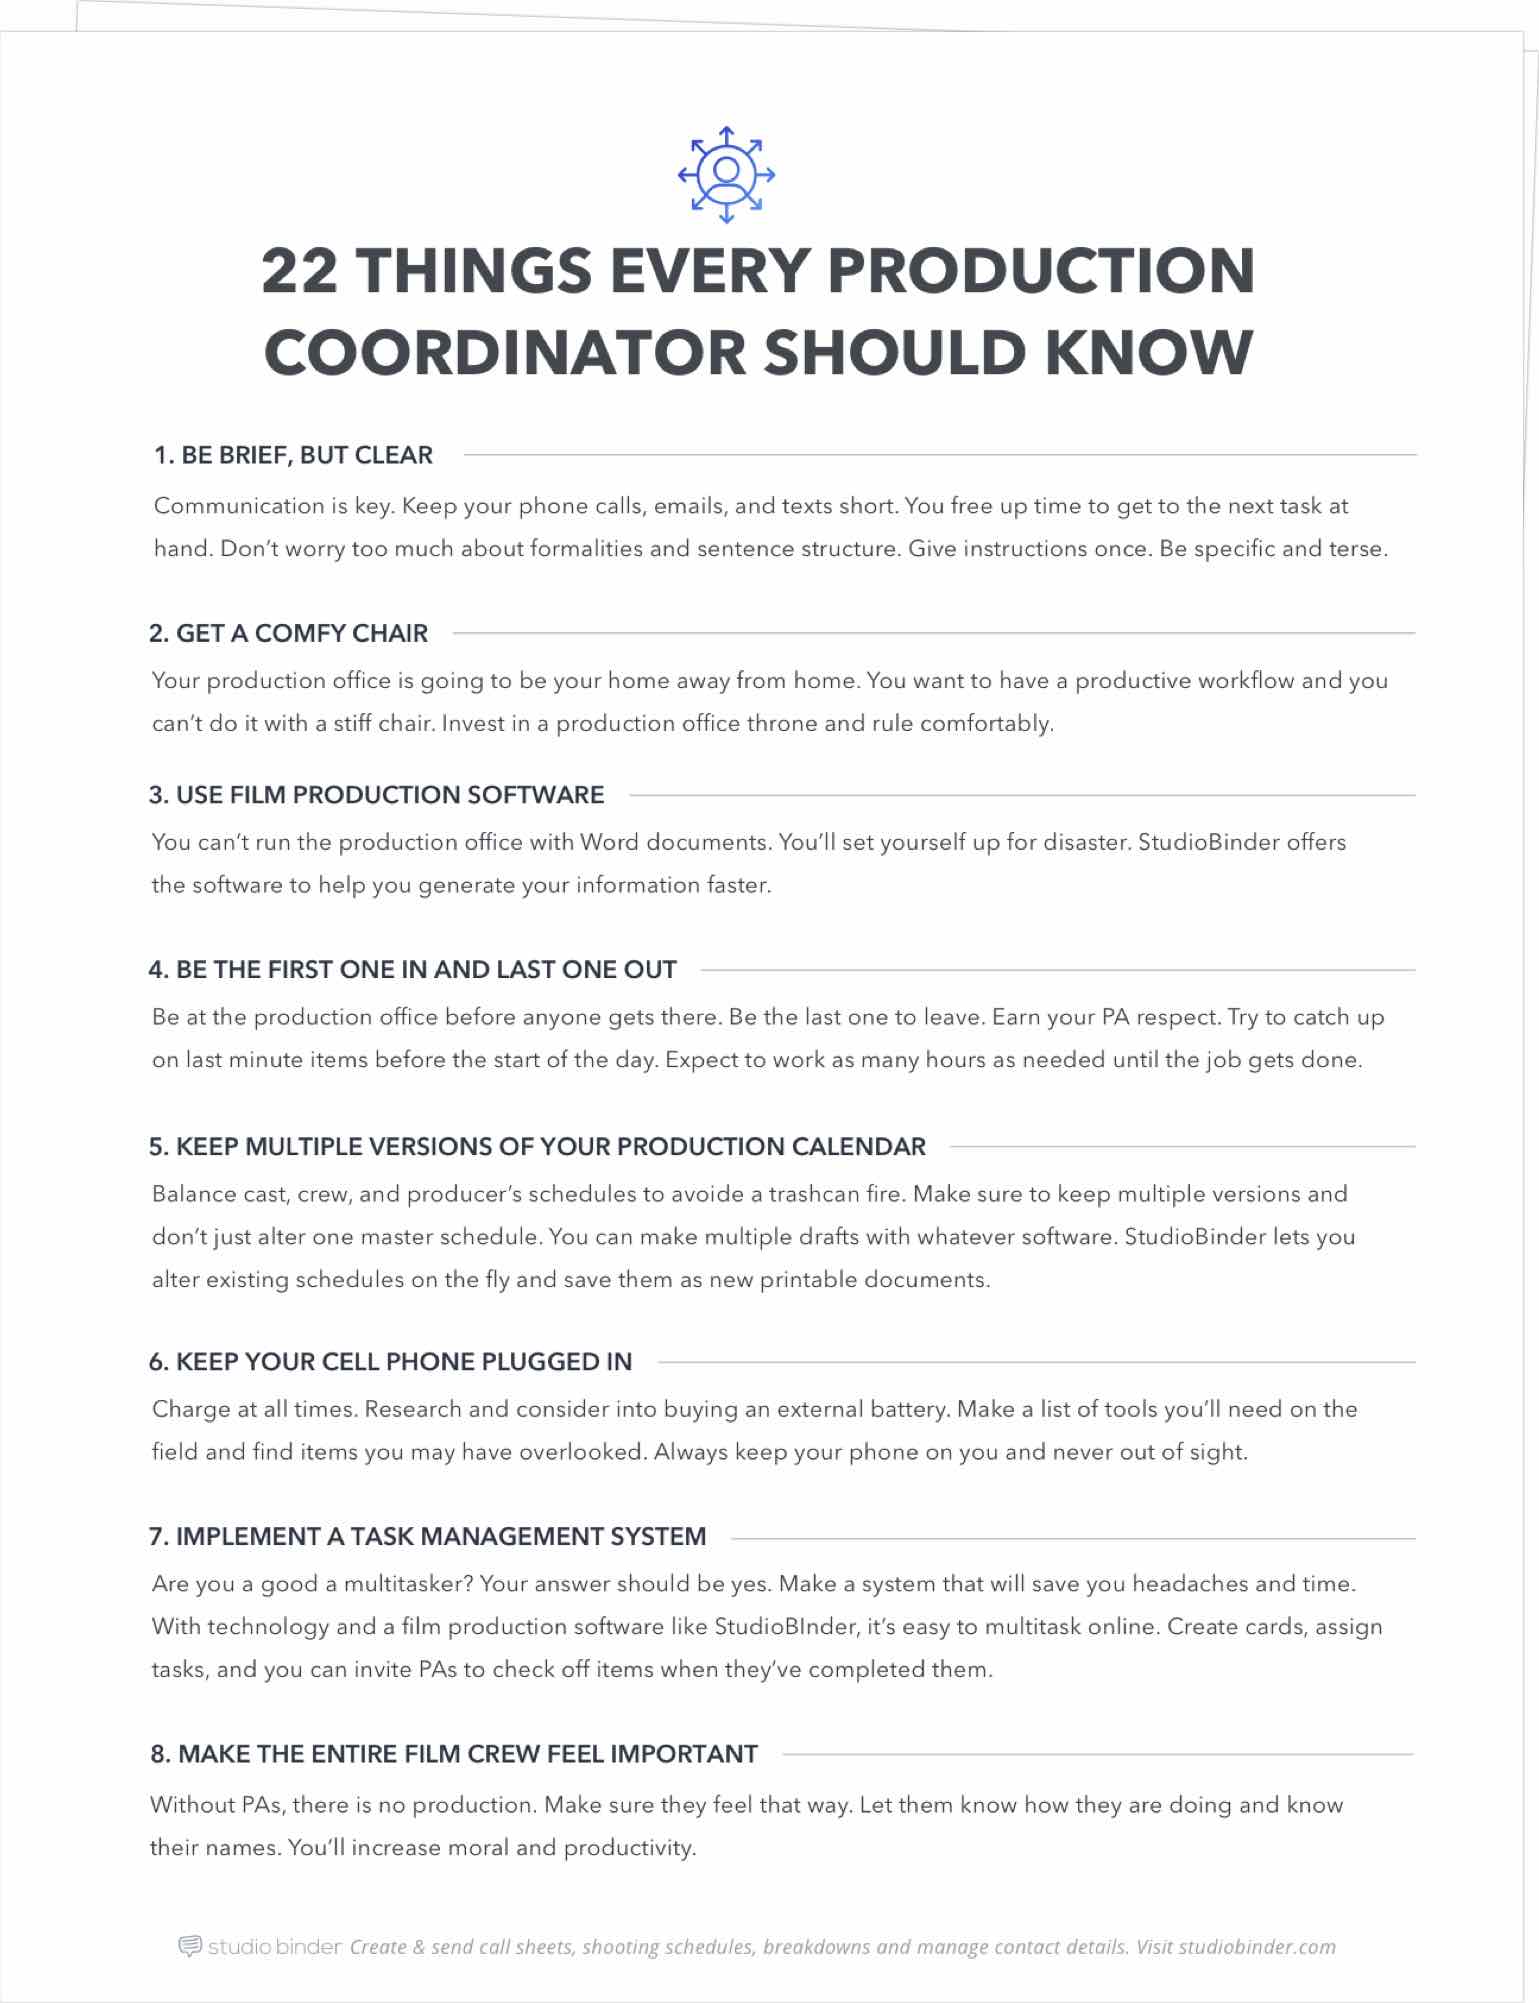 22 Things Every Production Coordinator Should Know - Page Stack - StudioBinder